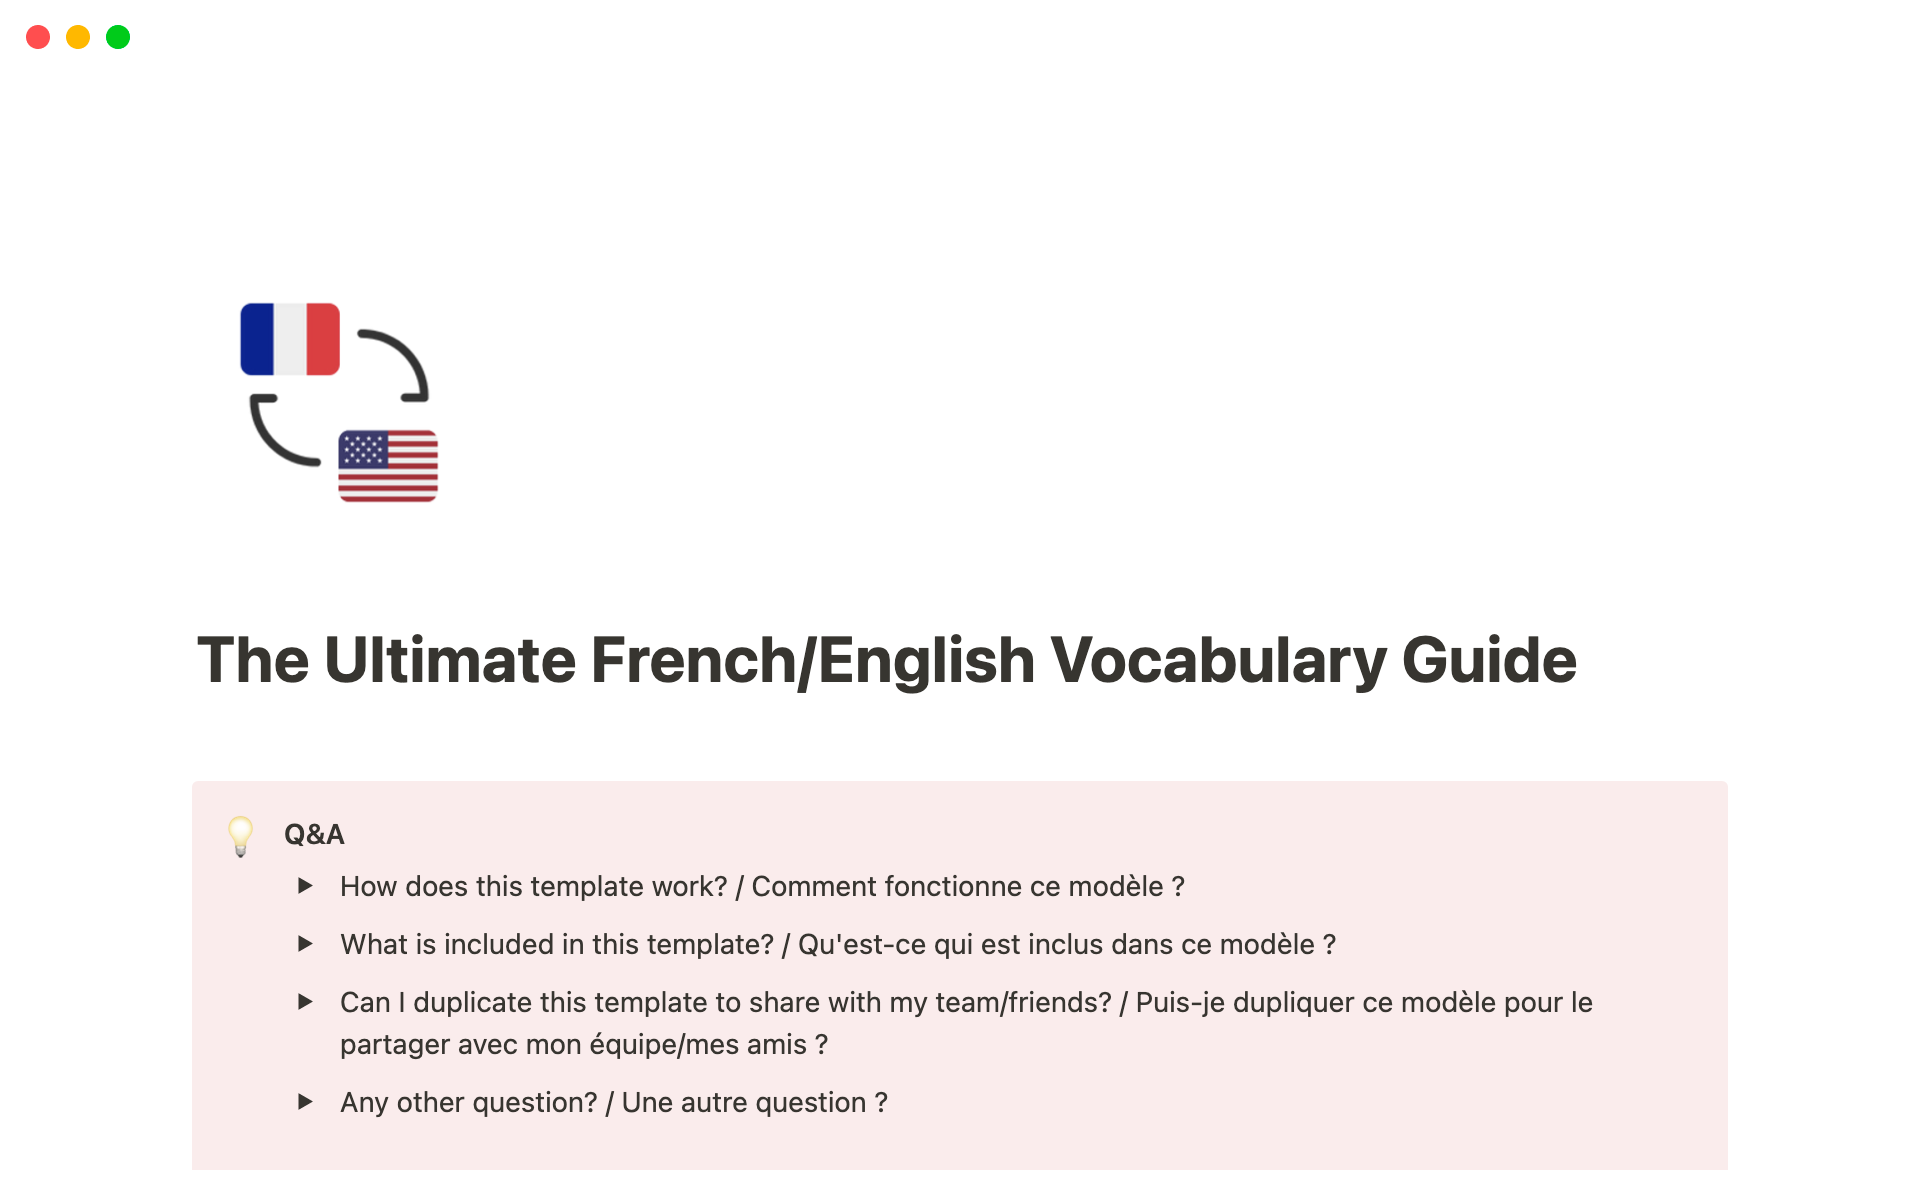 A Notion template that helps you learn French (or English, for French speaking) vocabulary faster and more easily.